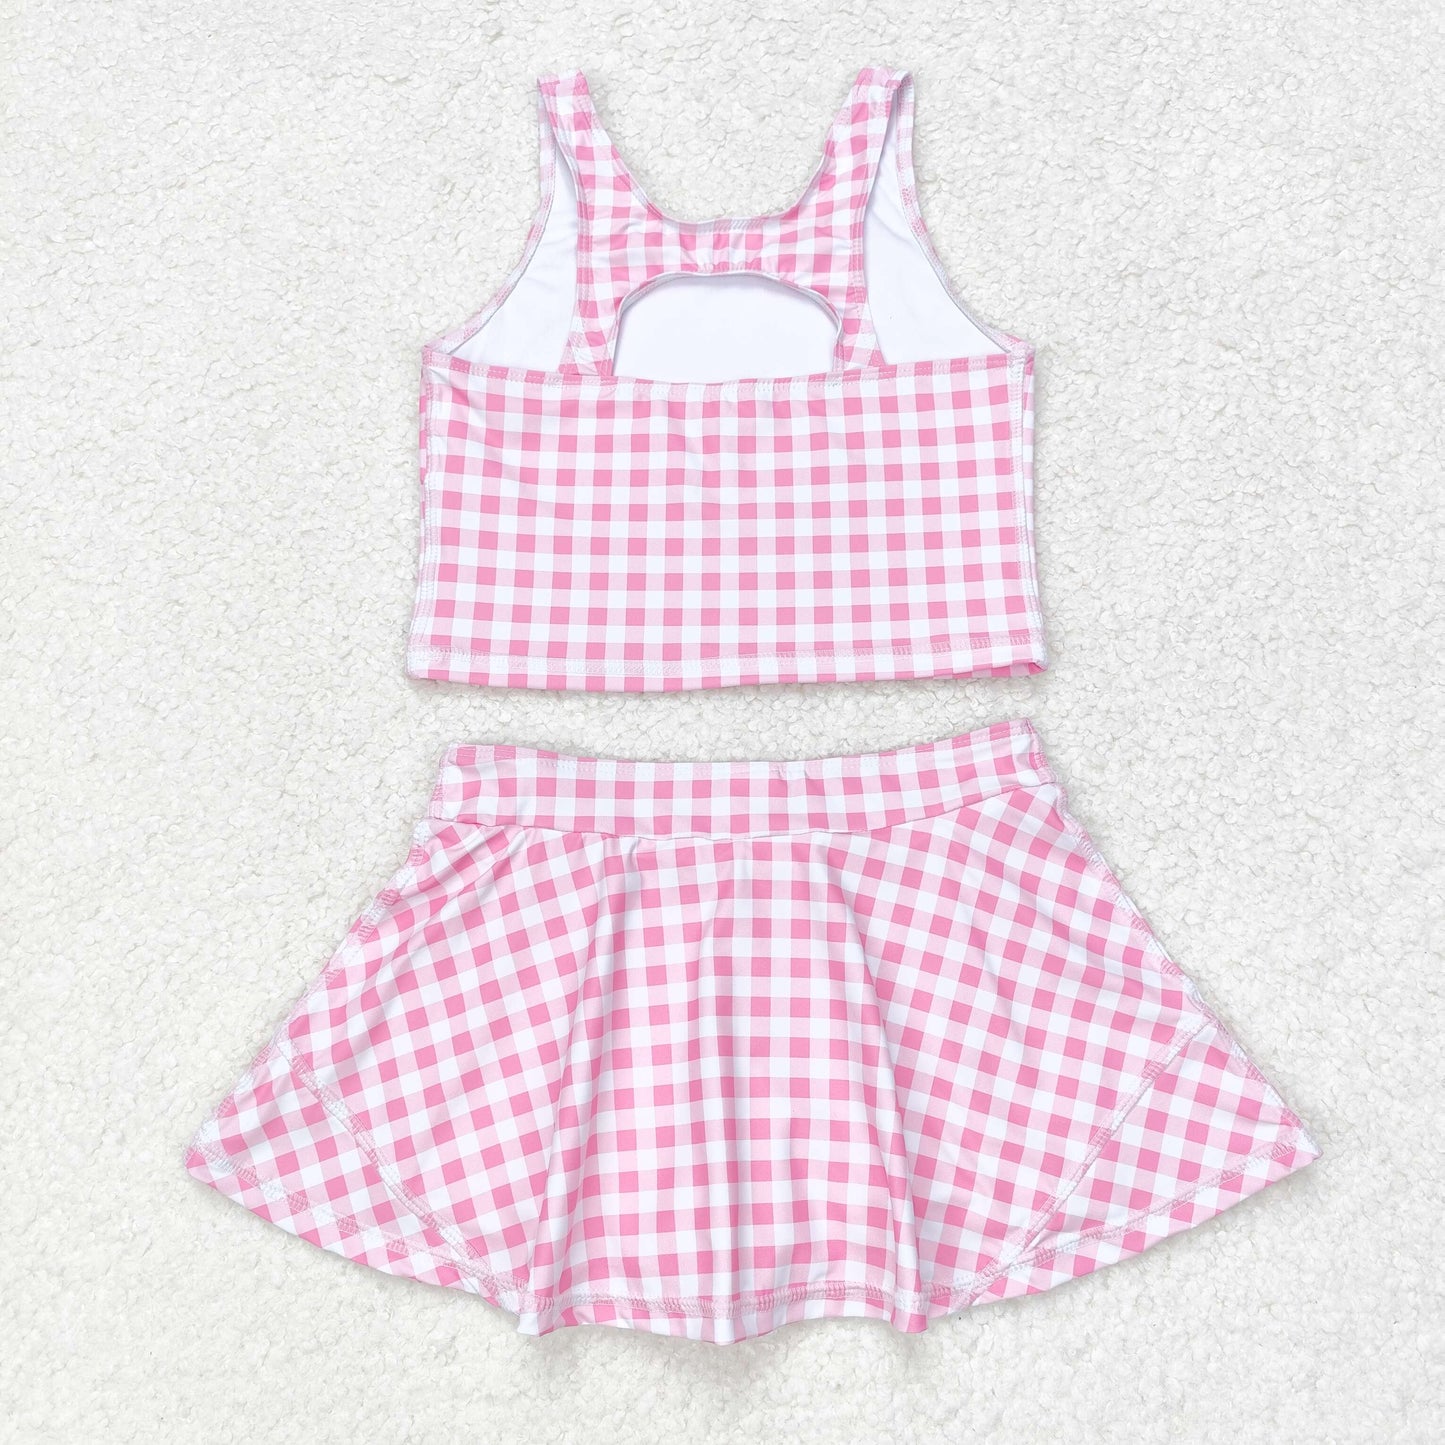 rts no moq GSD0992 Pink and white plaid sleeveless skirt suit